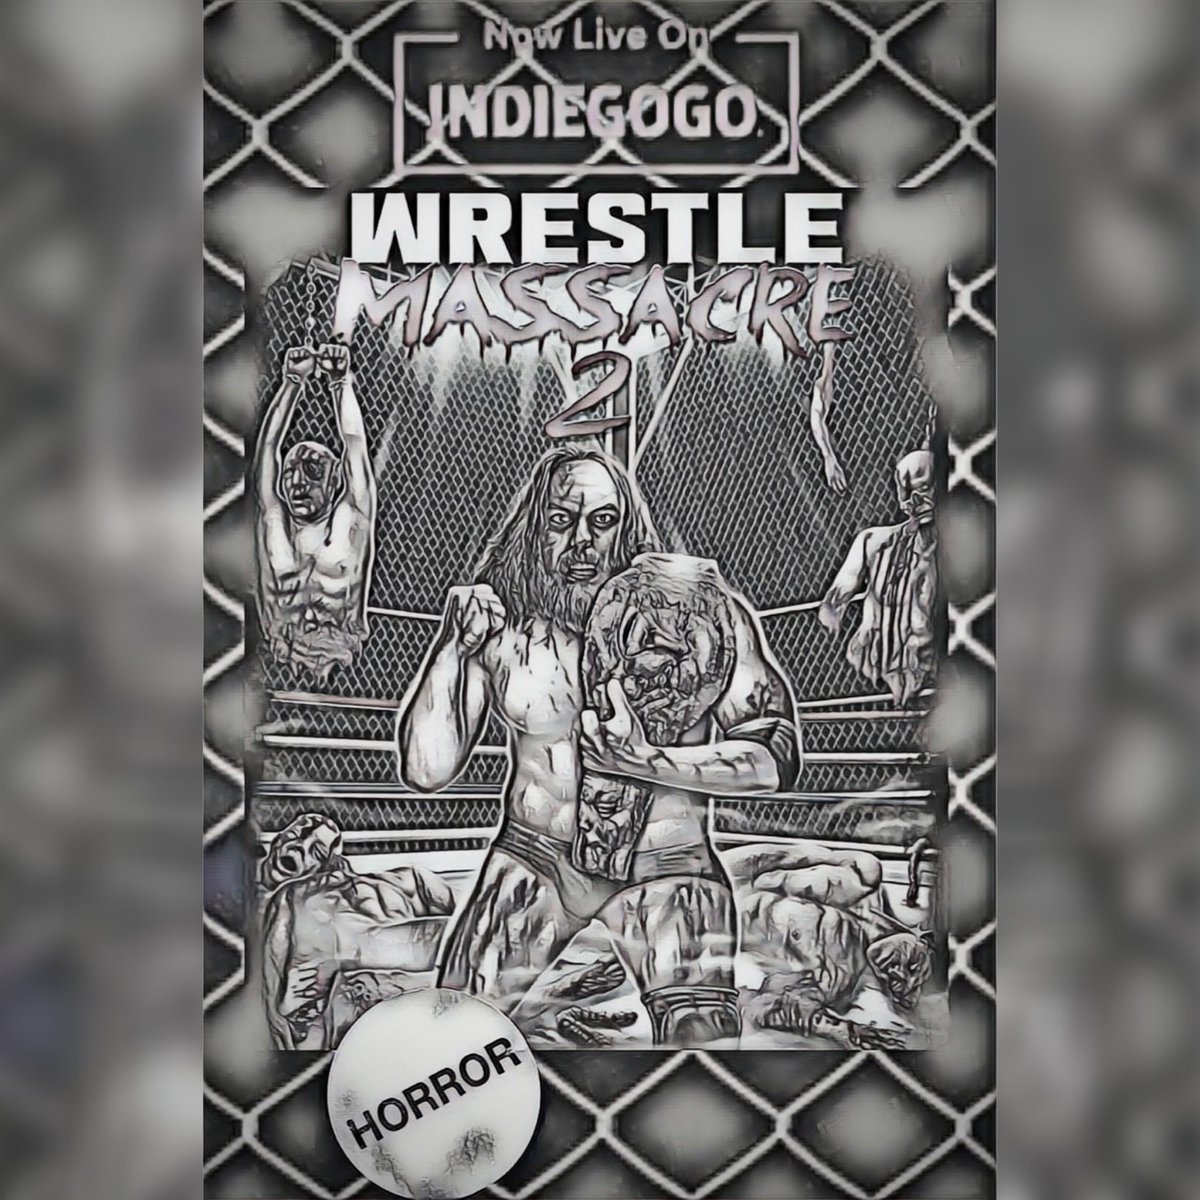 Randy takes on the persona of a different pro wrestler from his past. As the body count rises, his psychiatrist and the sheriff try to stop him..
#supporthorror #wrestlemassacre #wrestling #wrestler #wrestle #killer #slasher
indiegogo.com/projects/crack…